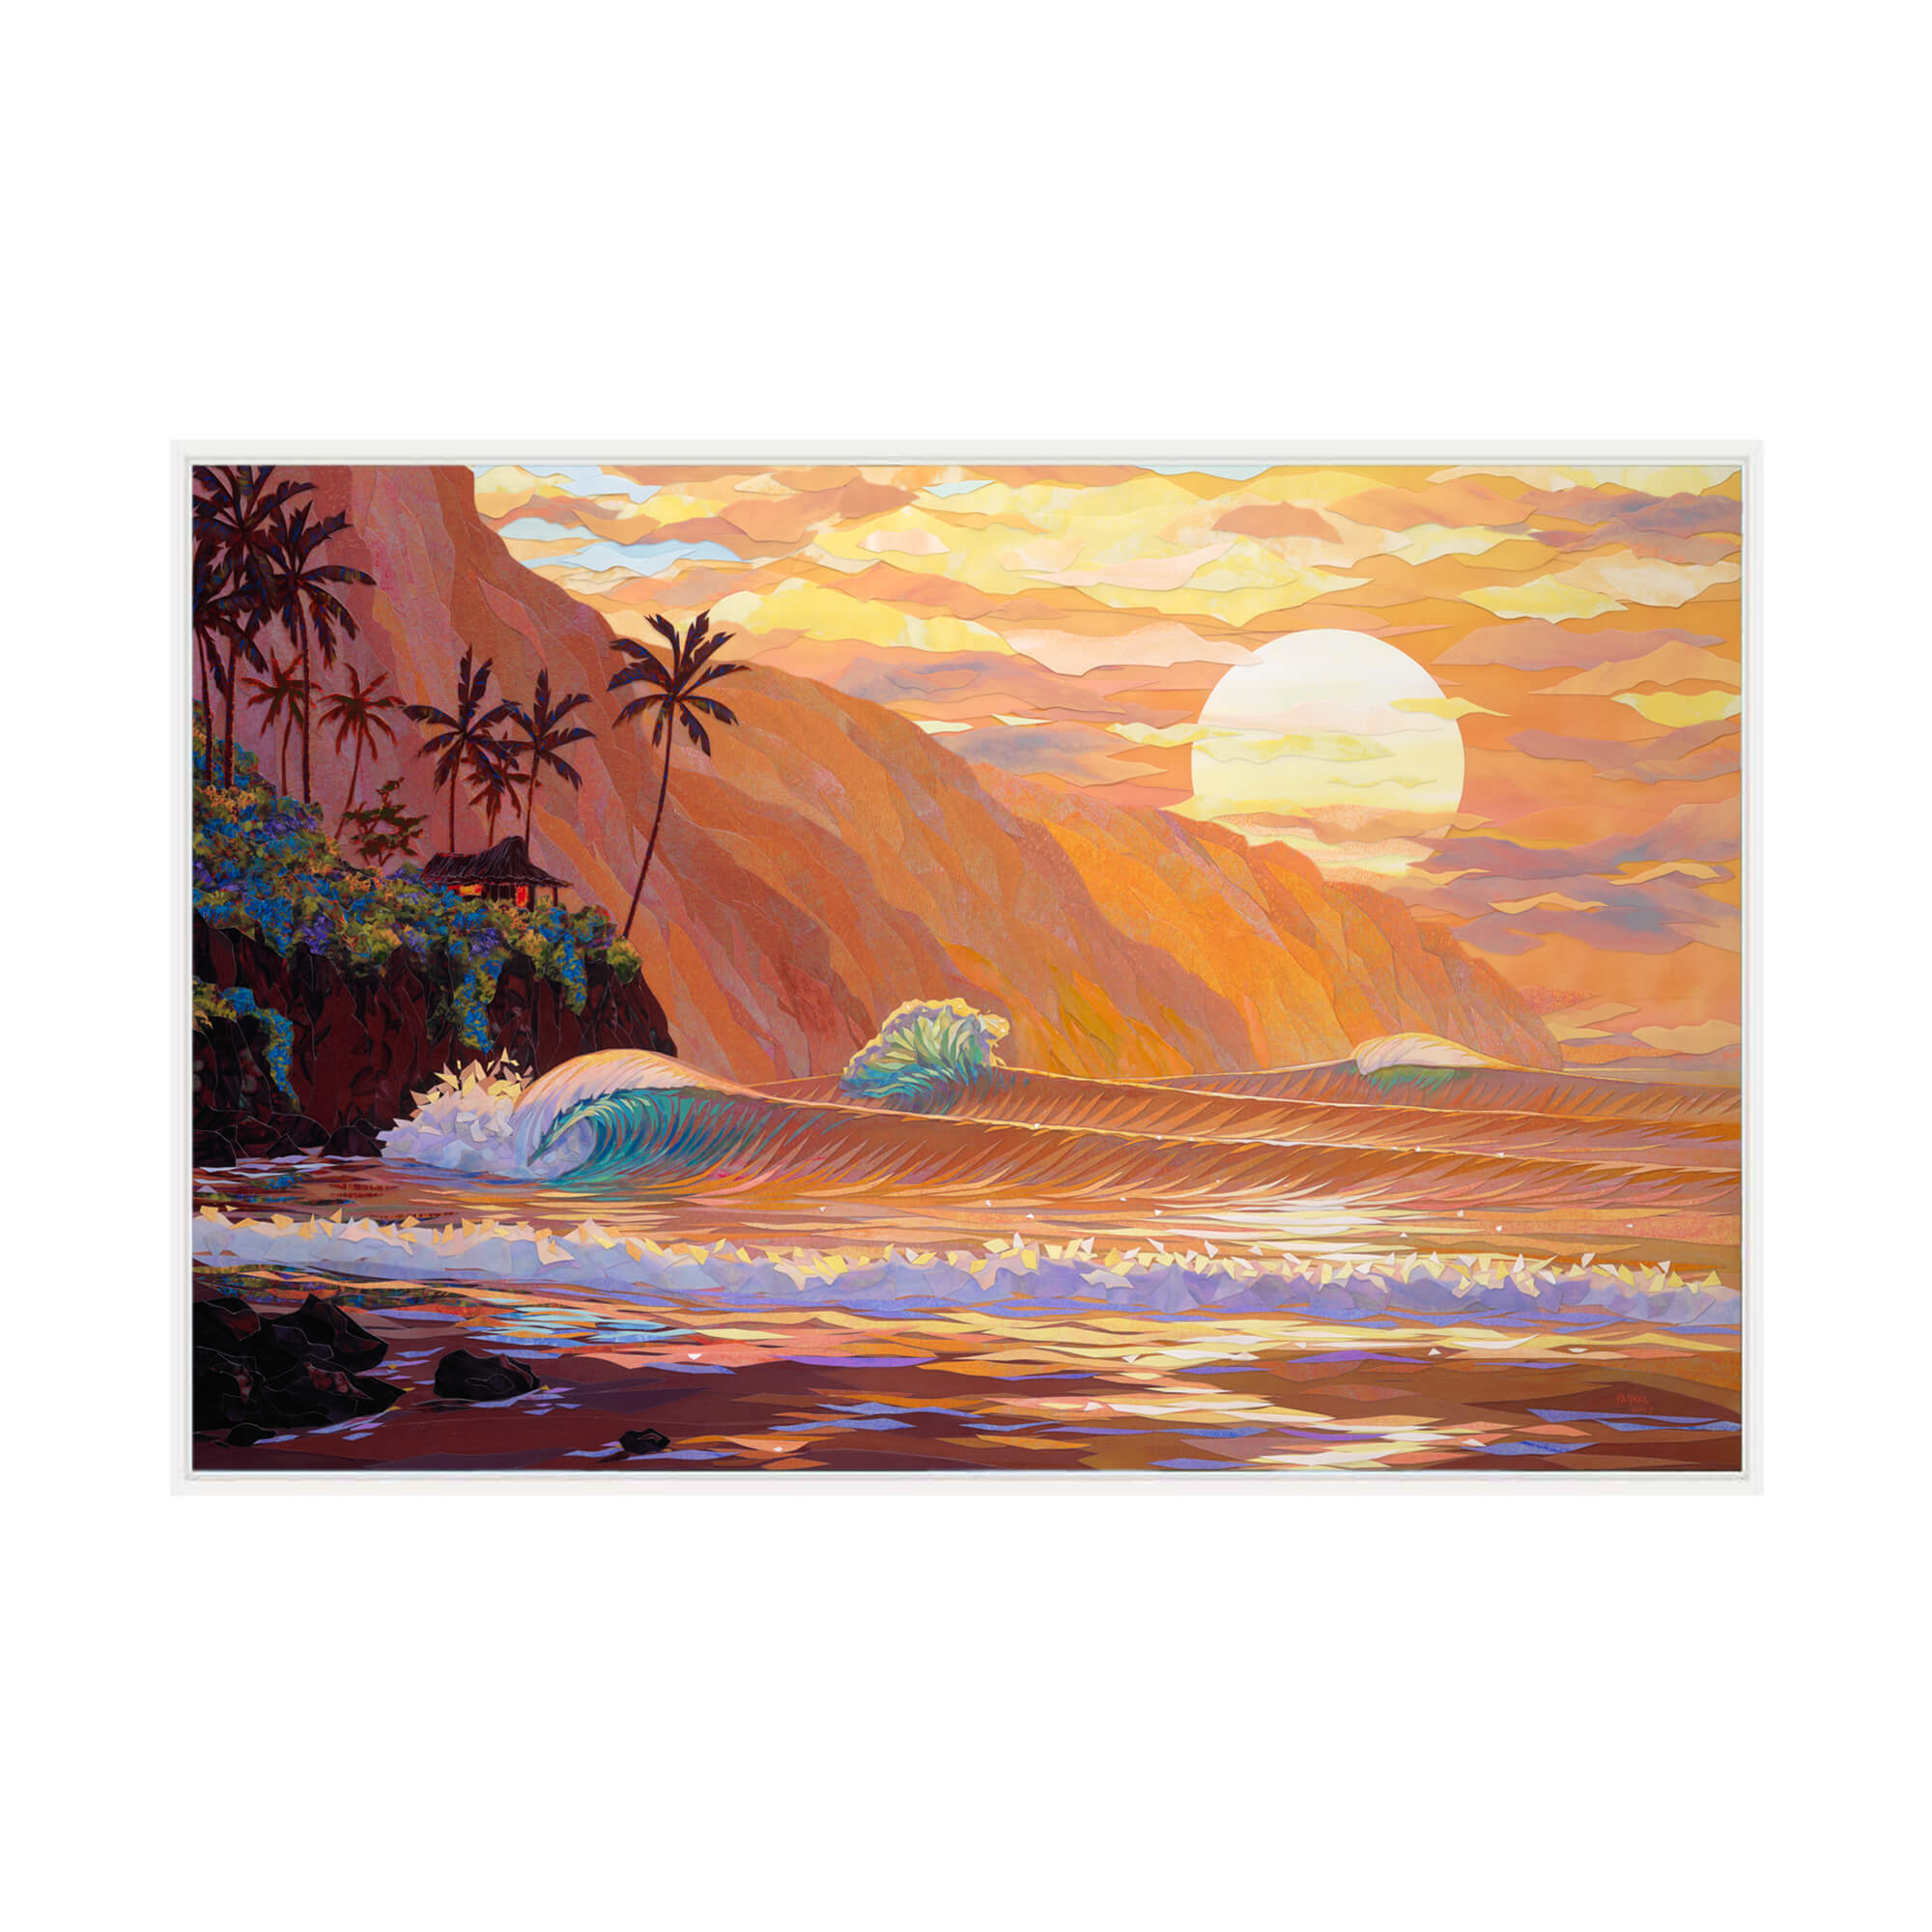 A framed canvas giclée art print featuring a collage of a sunset view of the ocean as seen from a tropical beach in Hawaii by Hawaii artist Patrick Parker